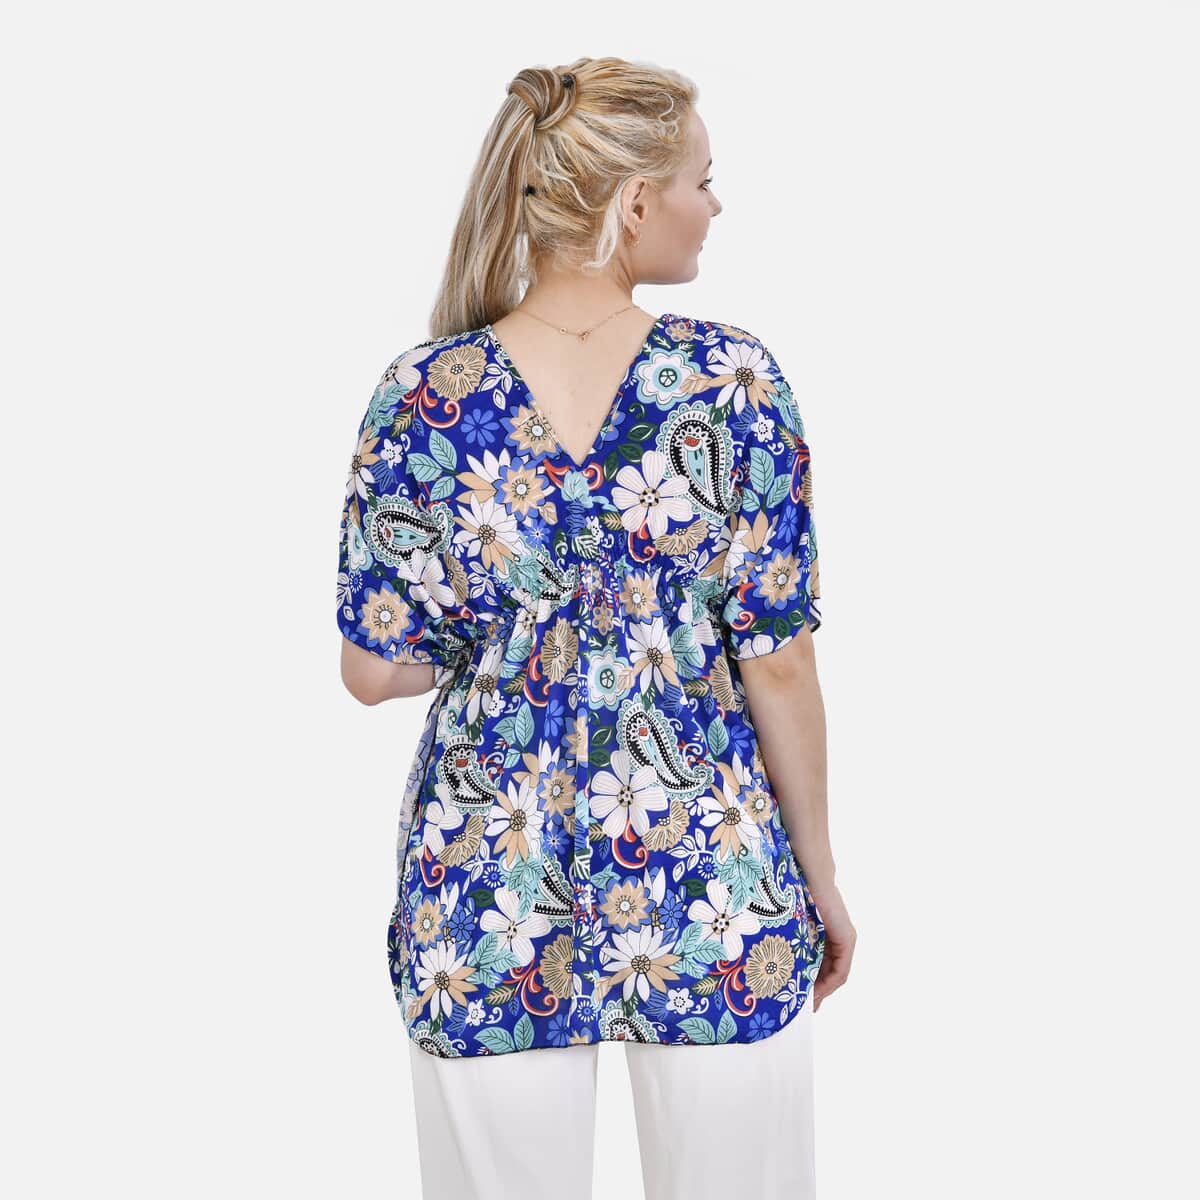 Tamsy Blue Paisley Floral Vneck Top with Kimono Style Arm - One Size Fits Most image number 1